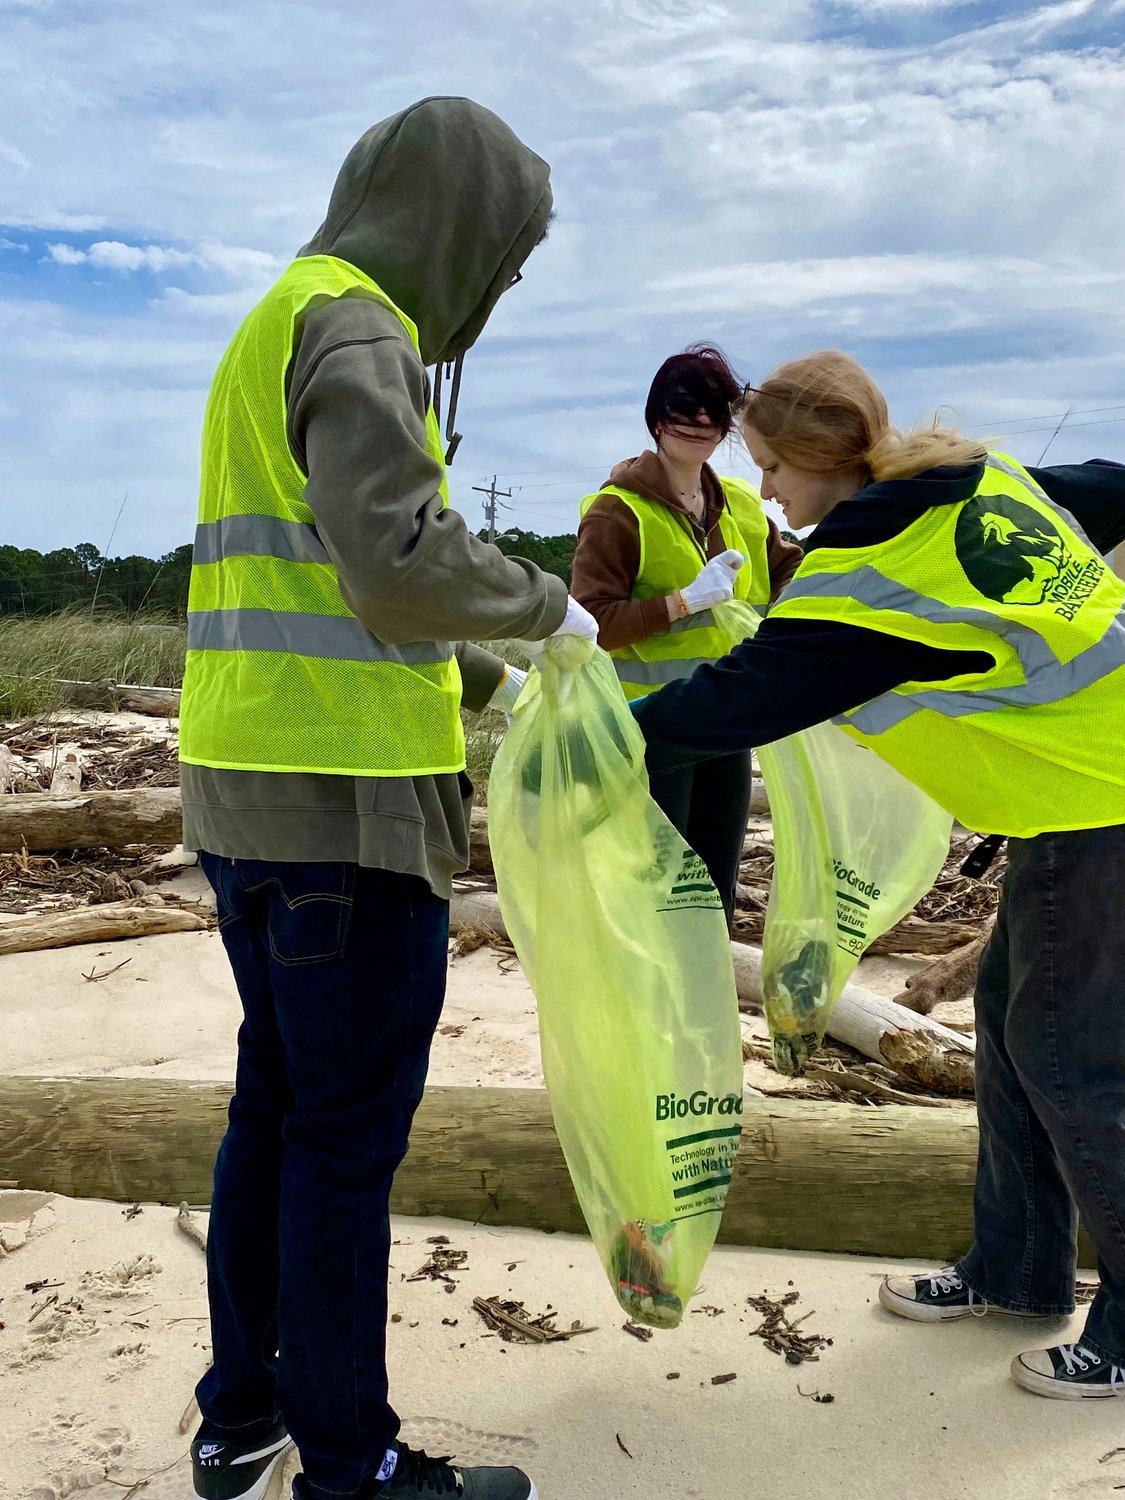 Emily Ammons, Jermaine Frye and Emily Whiddon, a group of friends from Mobile, volunteered to clean up the beach to get a chance at going to the Hangout Music Festival for the first time.